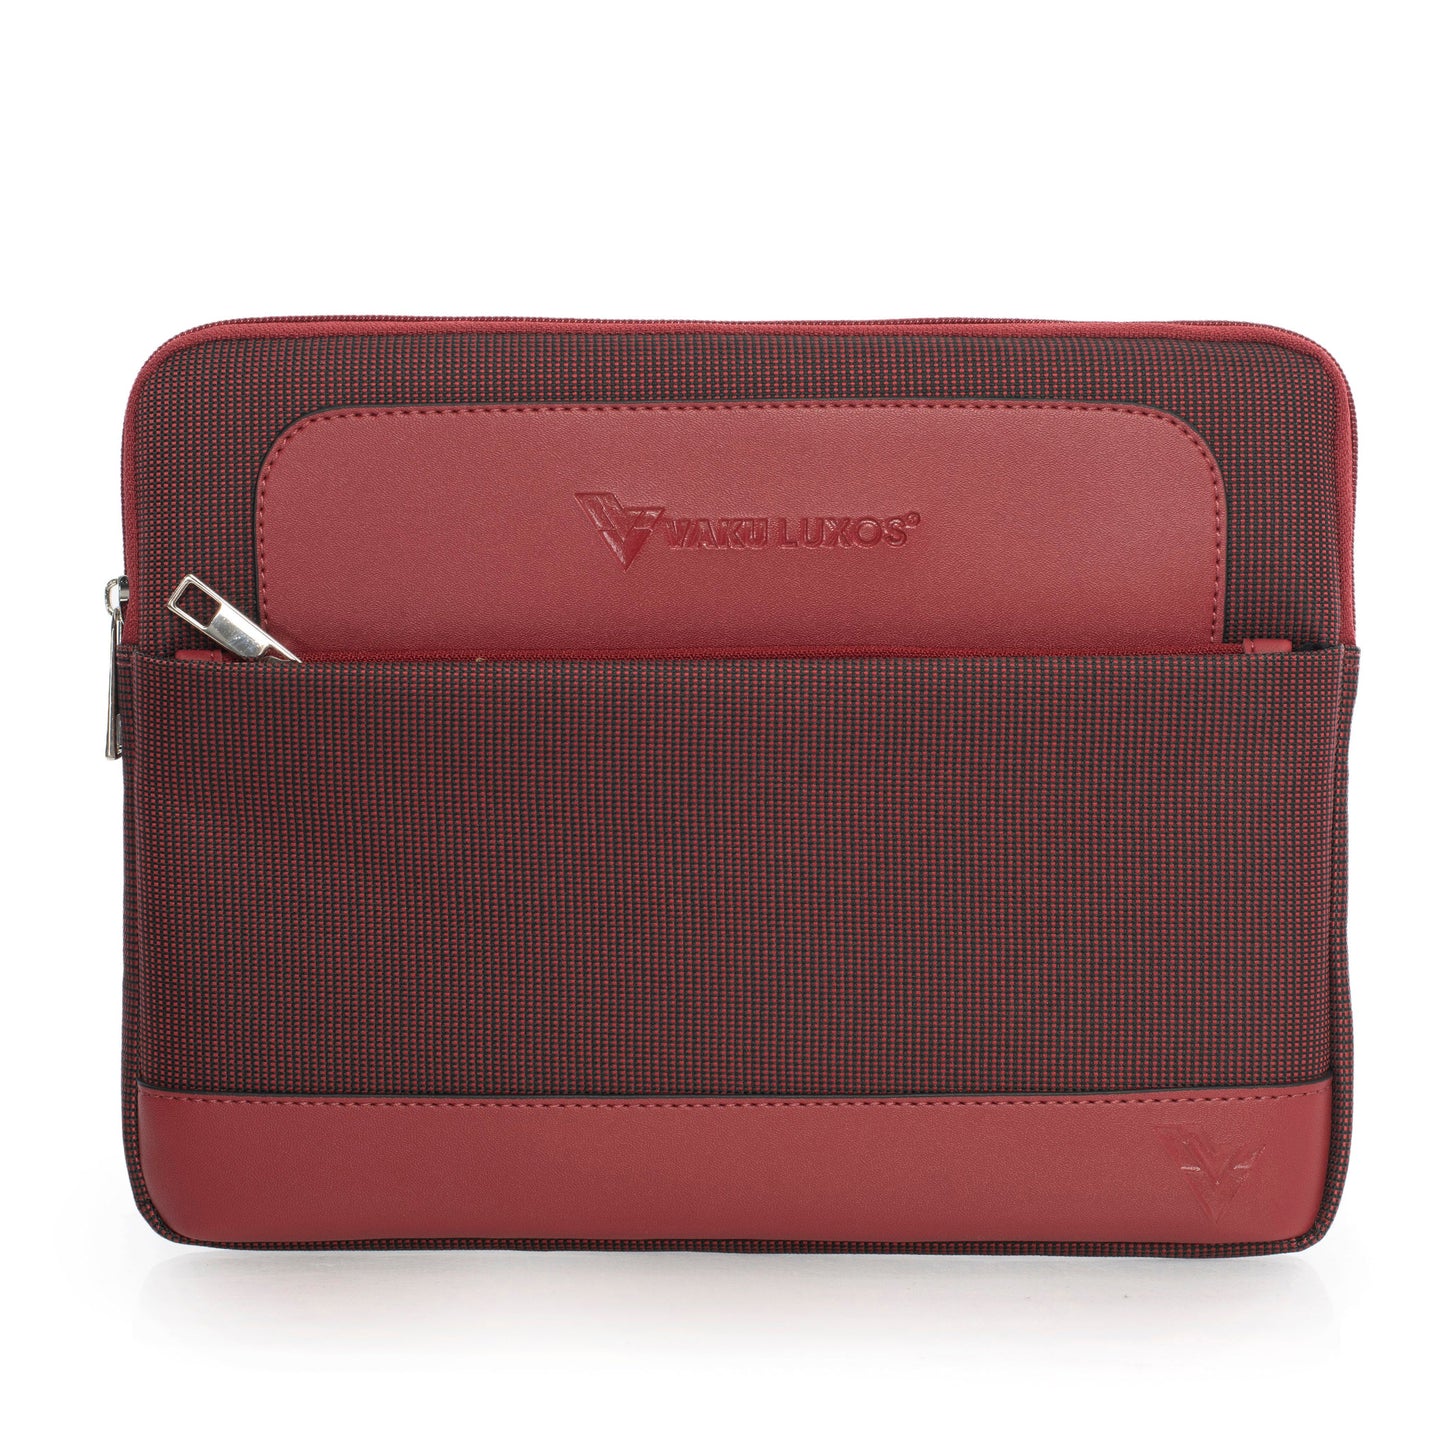 vaku-luxos®-salero-mini-pouch-for-ipad-air-pro-compatible-with-10-2-to-11-red8905129019334